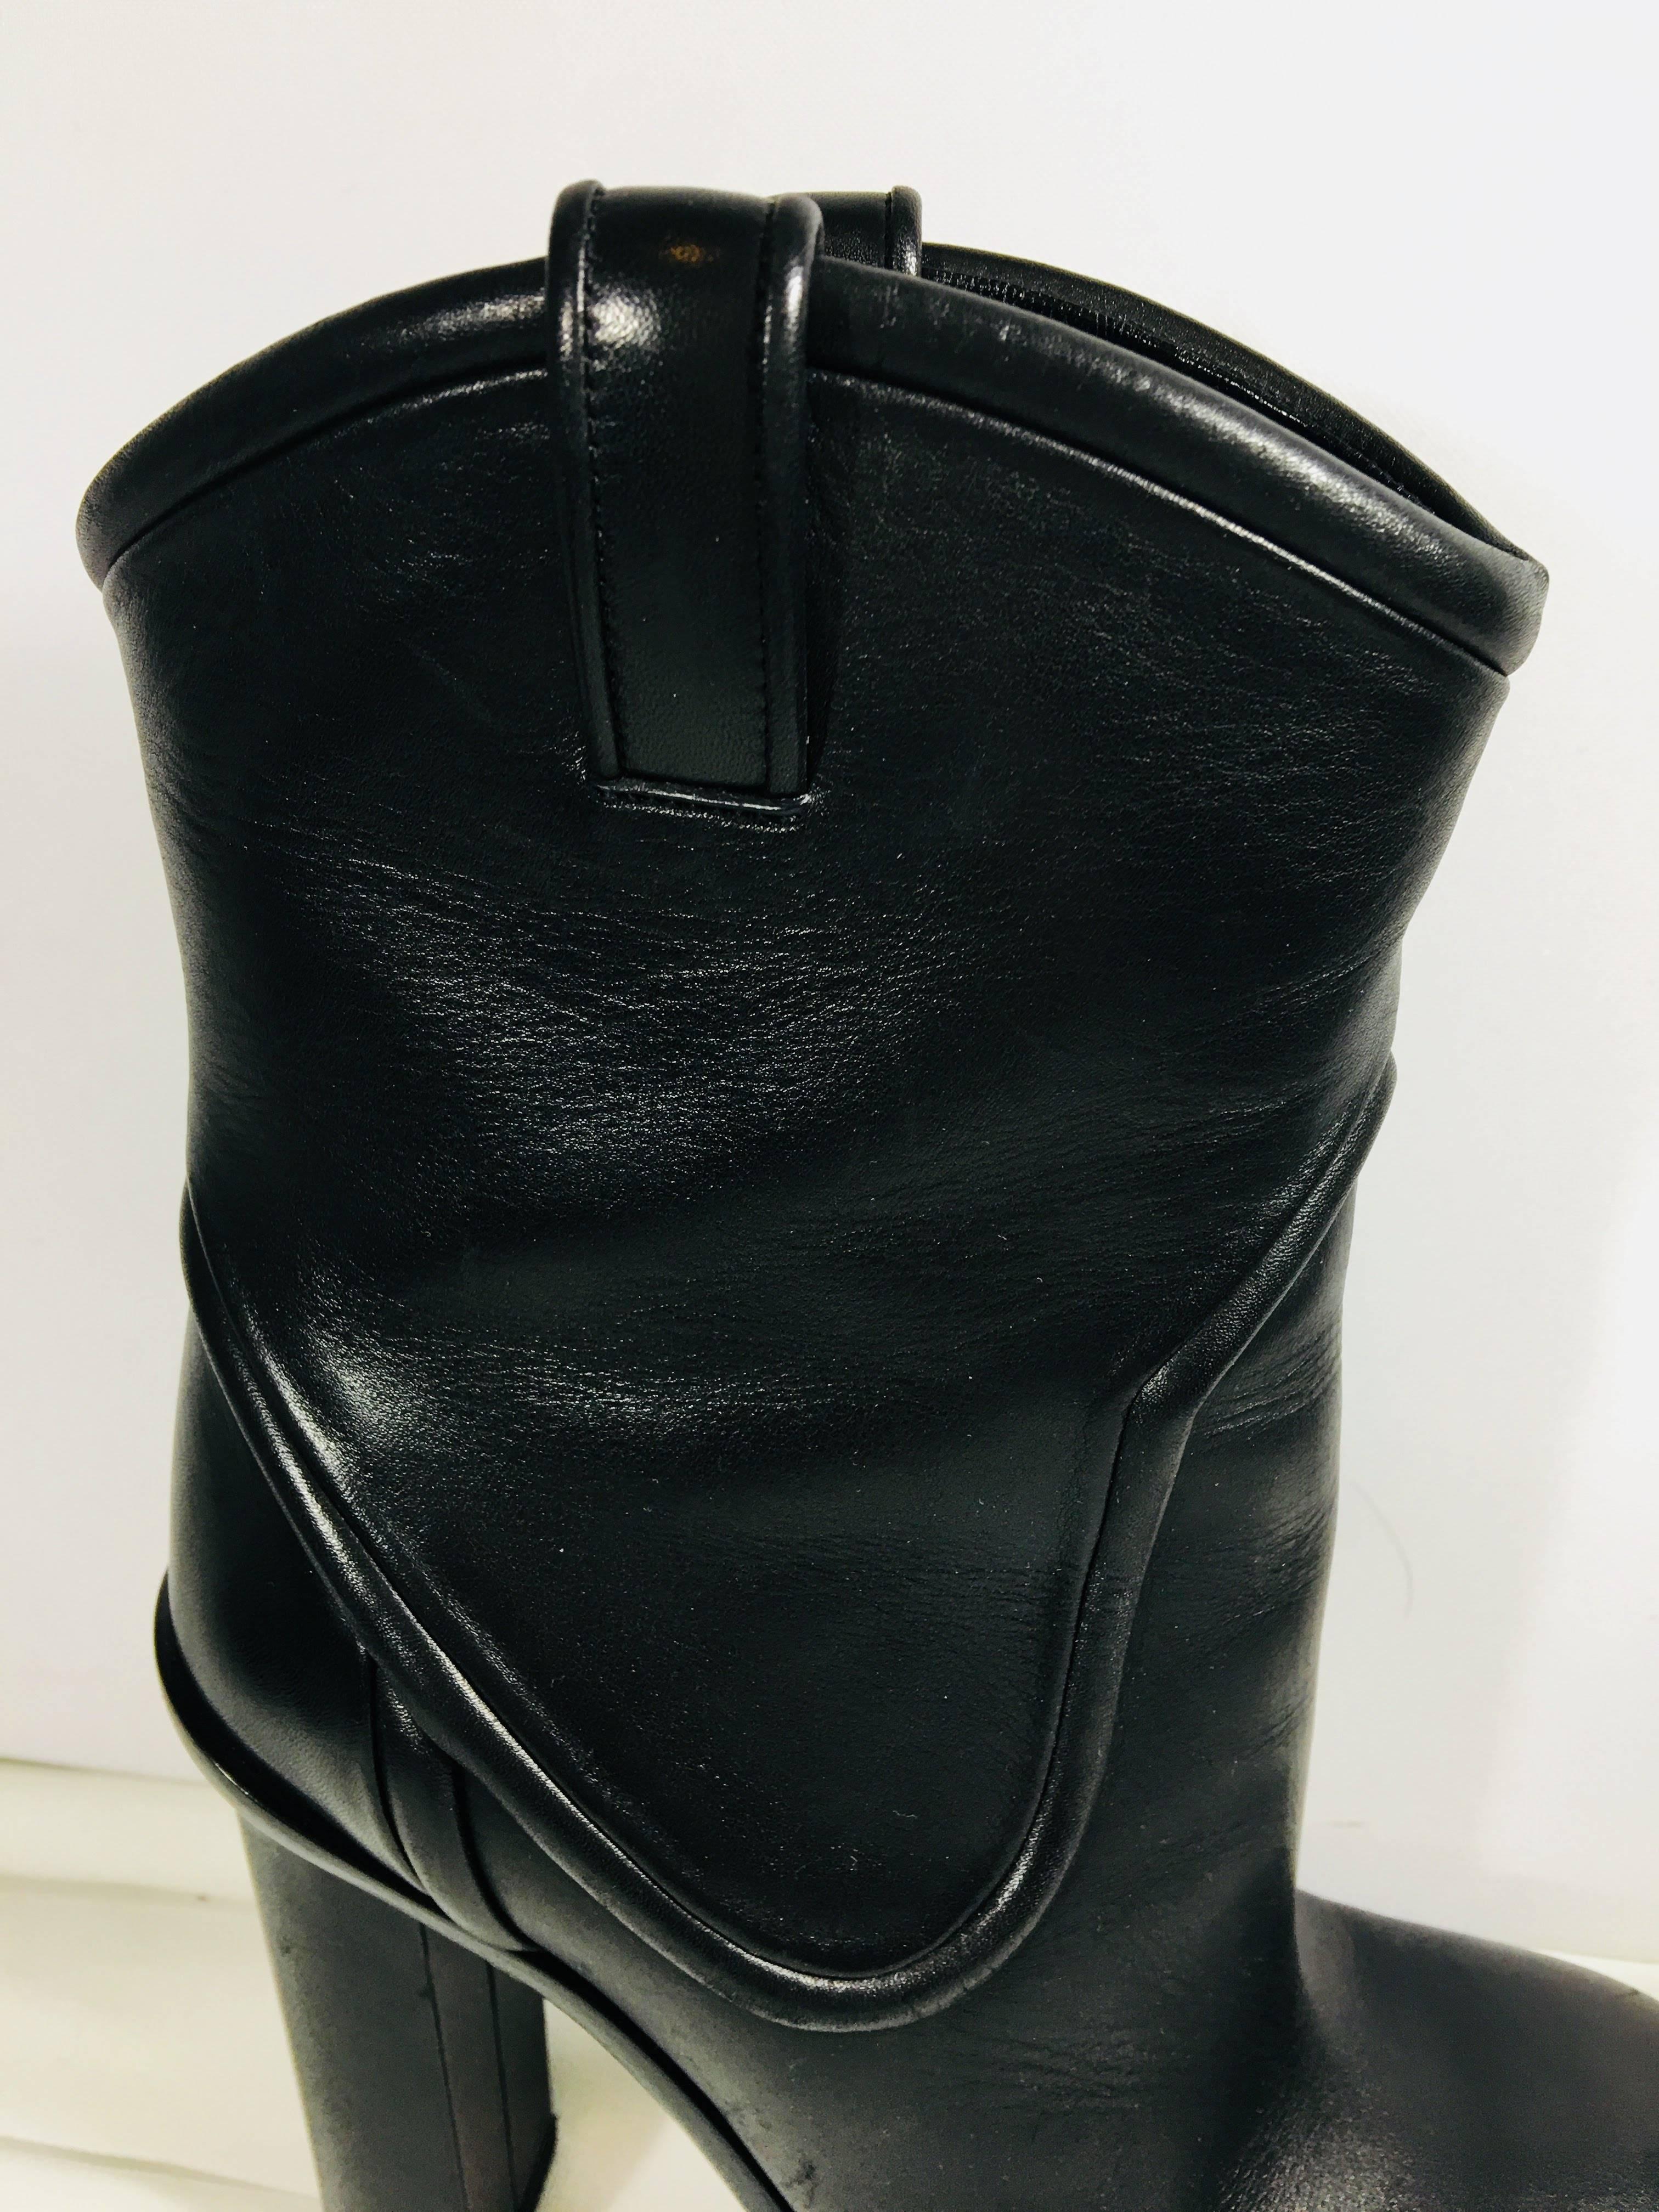 Gucci Black Leather Round Toe Mid Calf Boots with Chunky Heel.